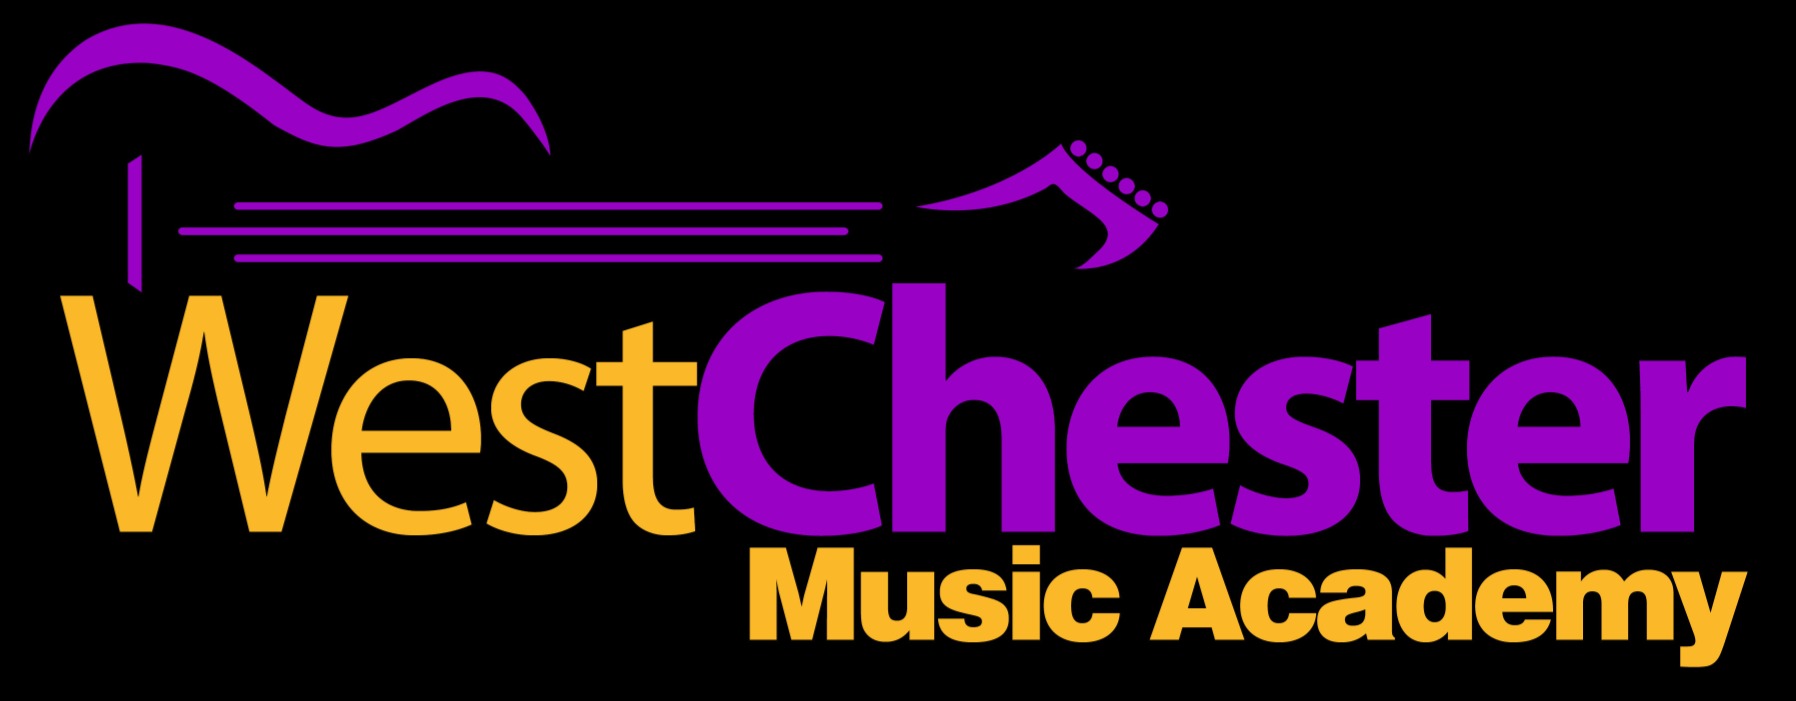 West Chester Music Academy